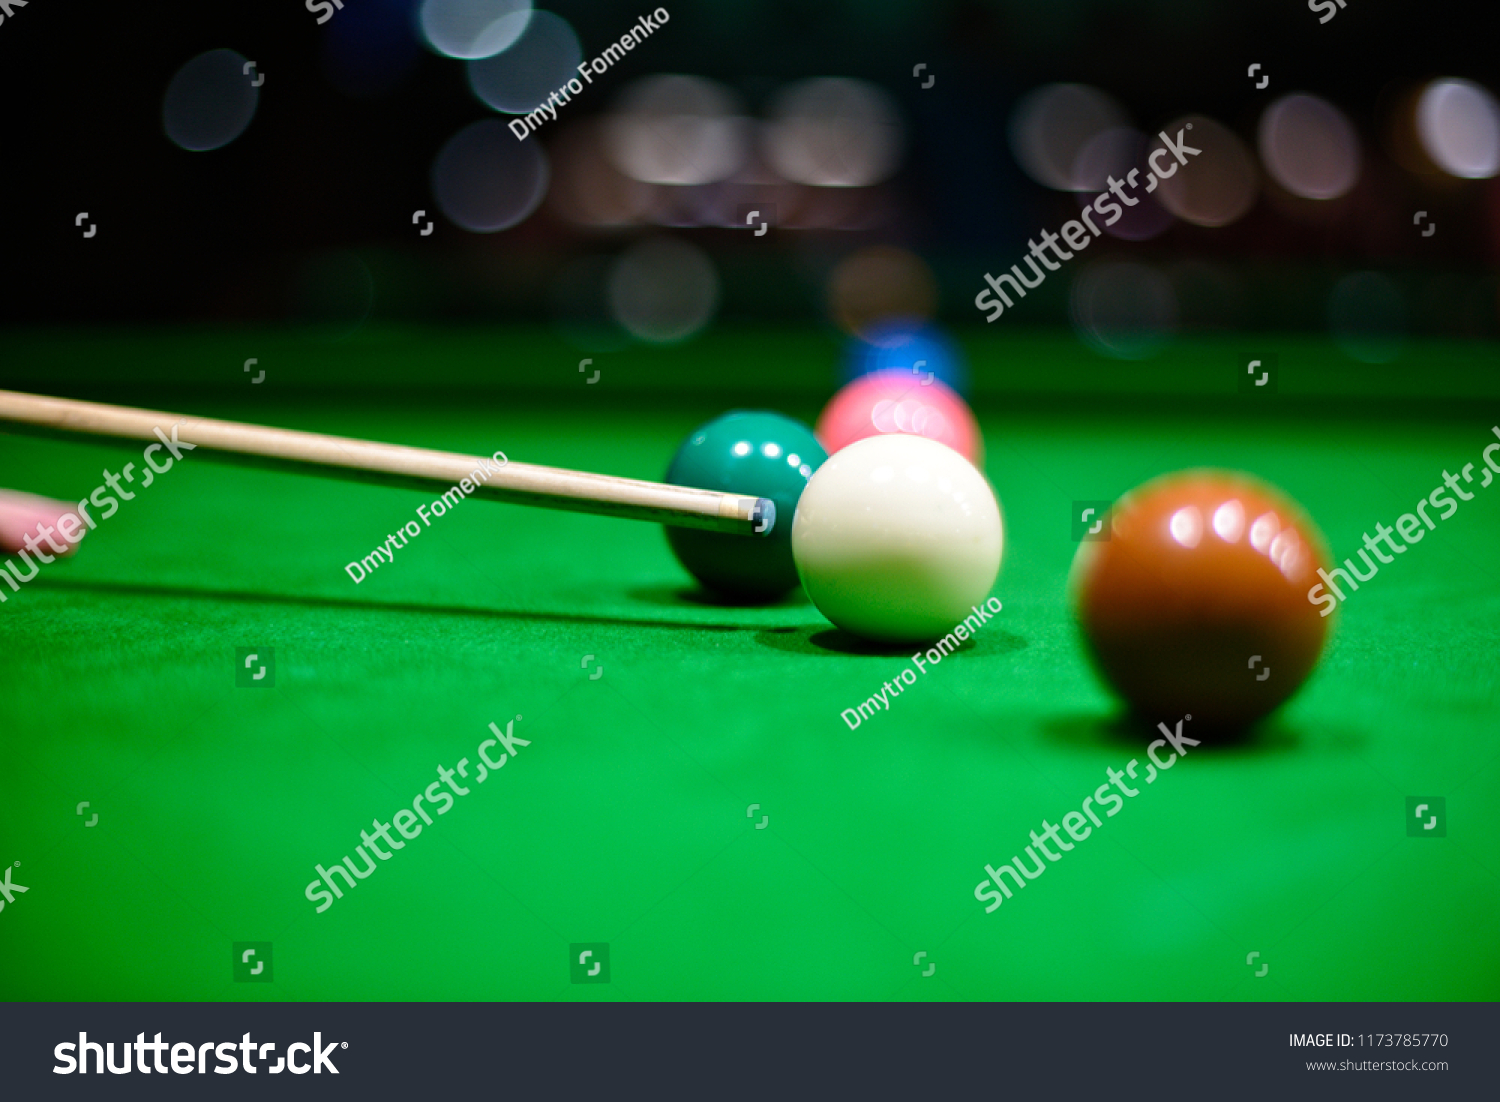 Snooker cue before the shot #1173785770